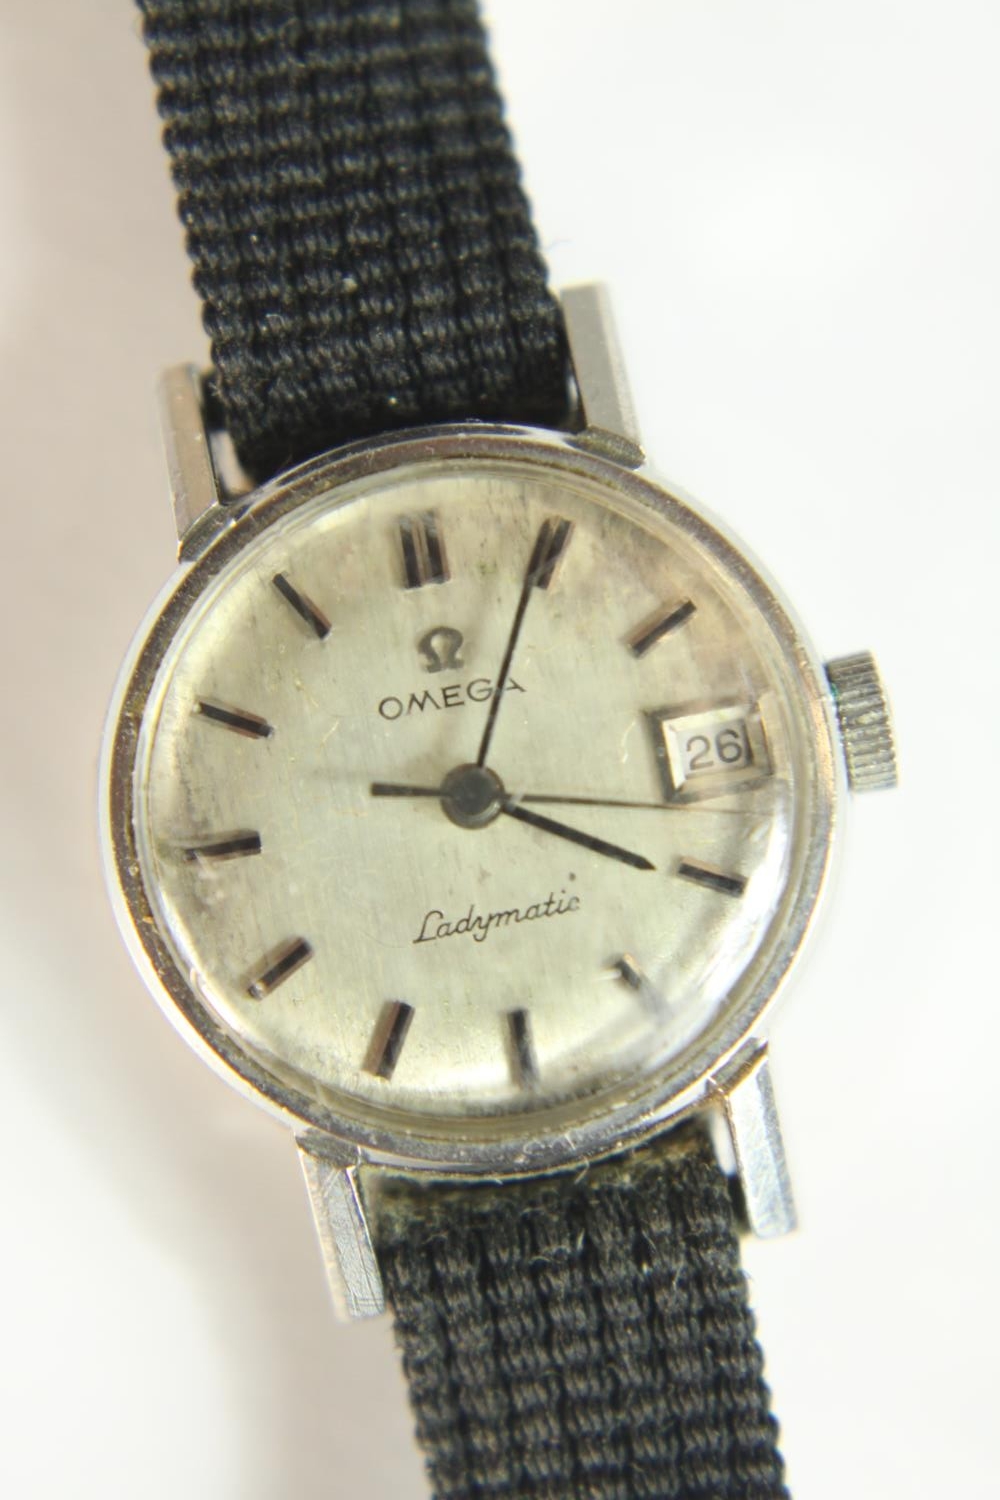 A vintage ladies Omega Ladymatic wristwatch, with baton numerals, sweeping second hand and date